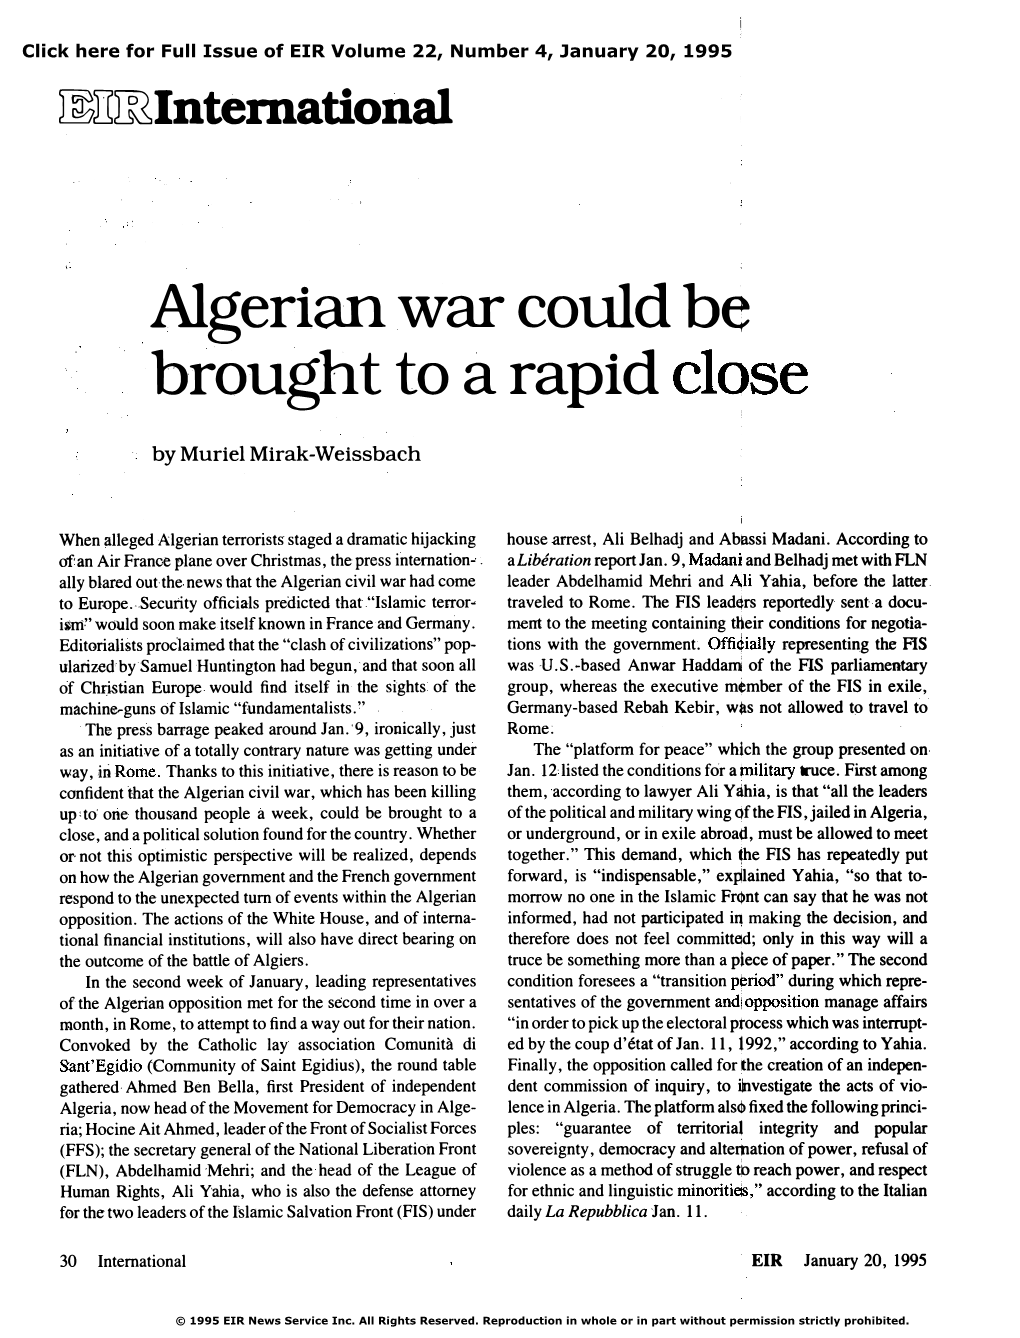 Algerian War Could Be Brought to a Rapid Close